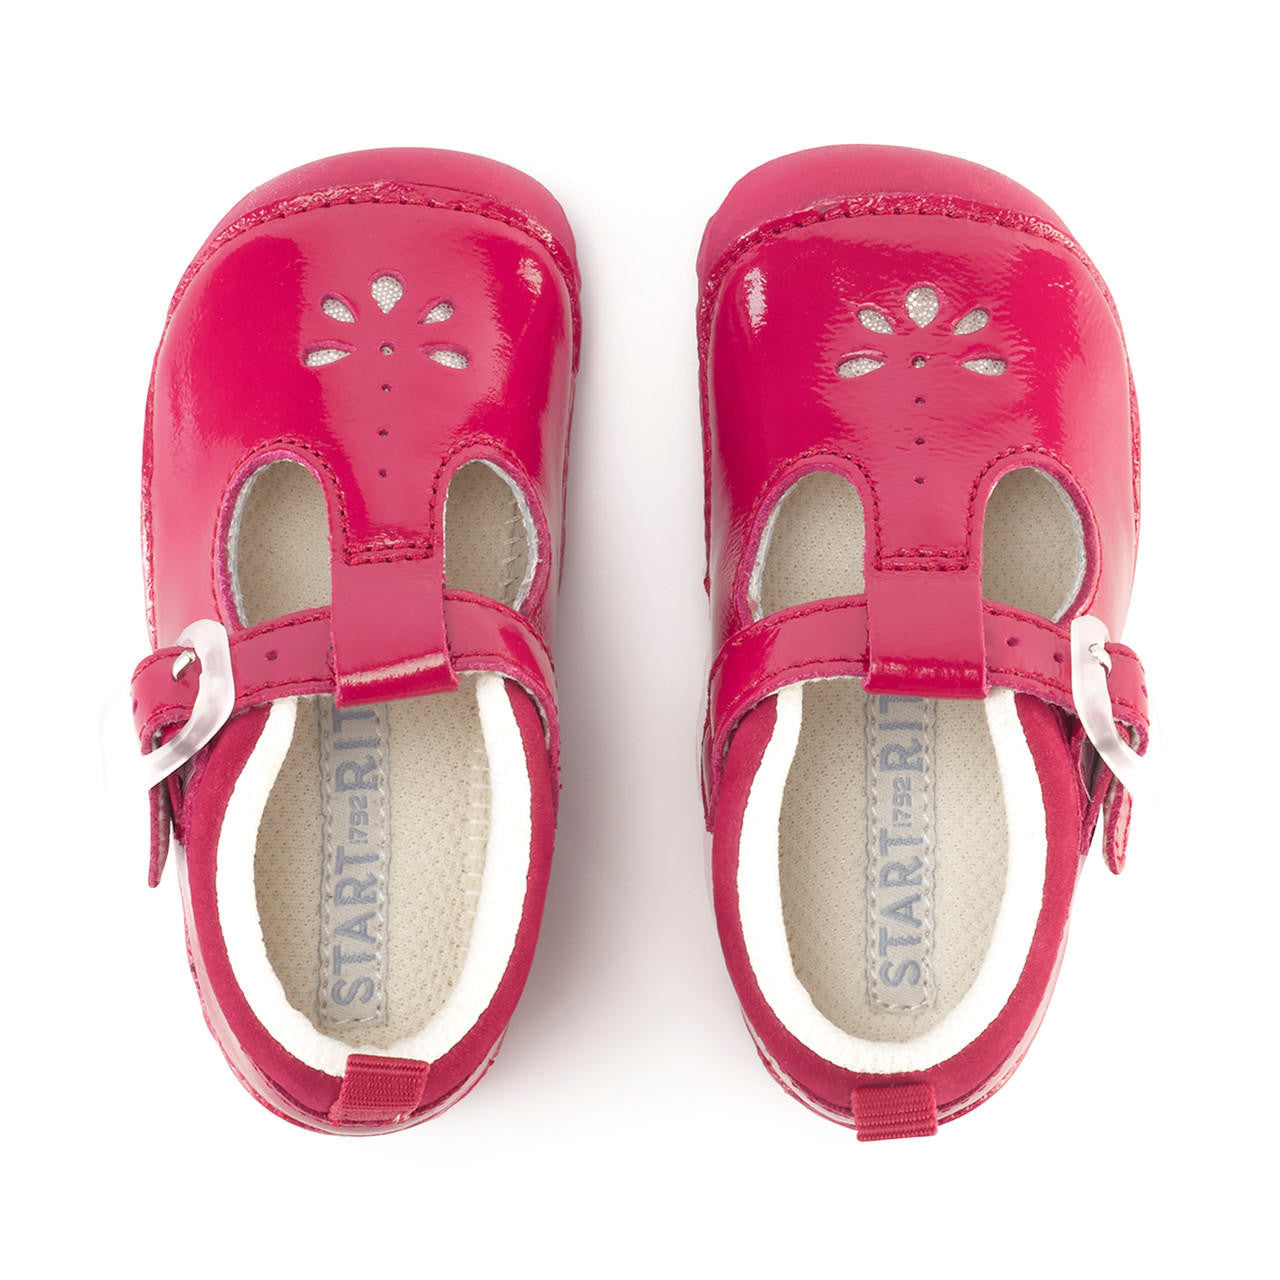 A pair of girls T-Bar pre-walkers by Start-Rite, style Baby Bubble, in red patent leather with silver punch out detail and toe bumper. Buckle fastening. Above view.